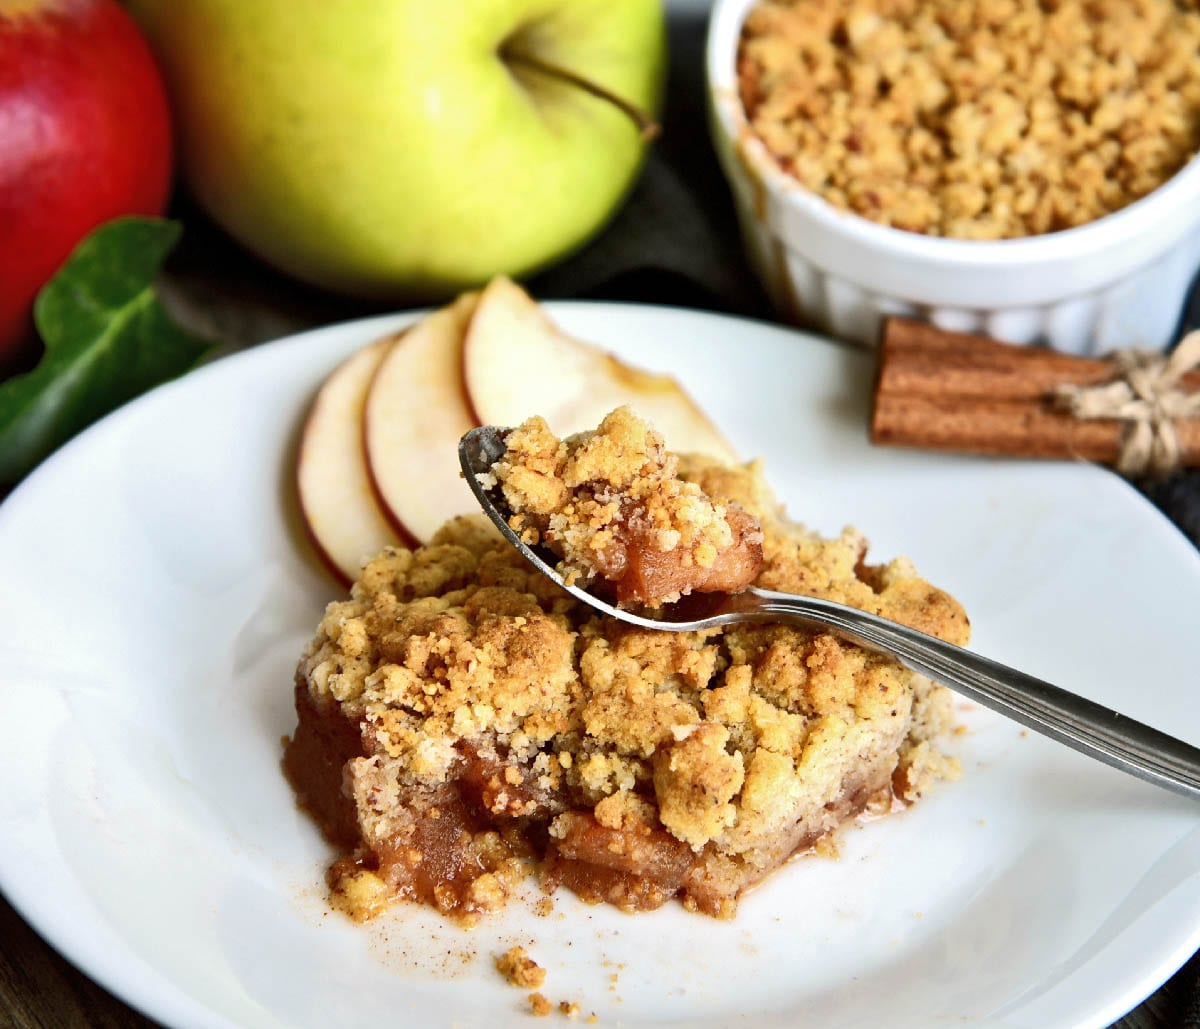 Apple,Crumble,On,With,Dish,With,Spoon,And,Fresh,Green